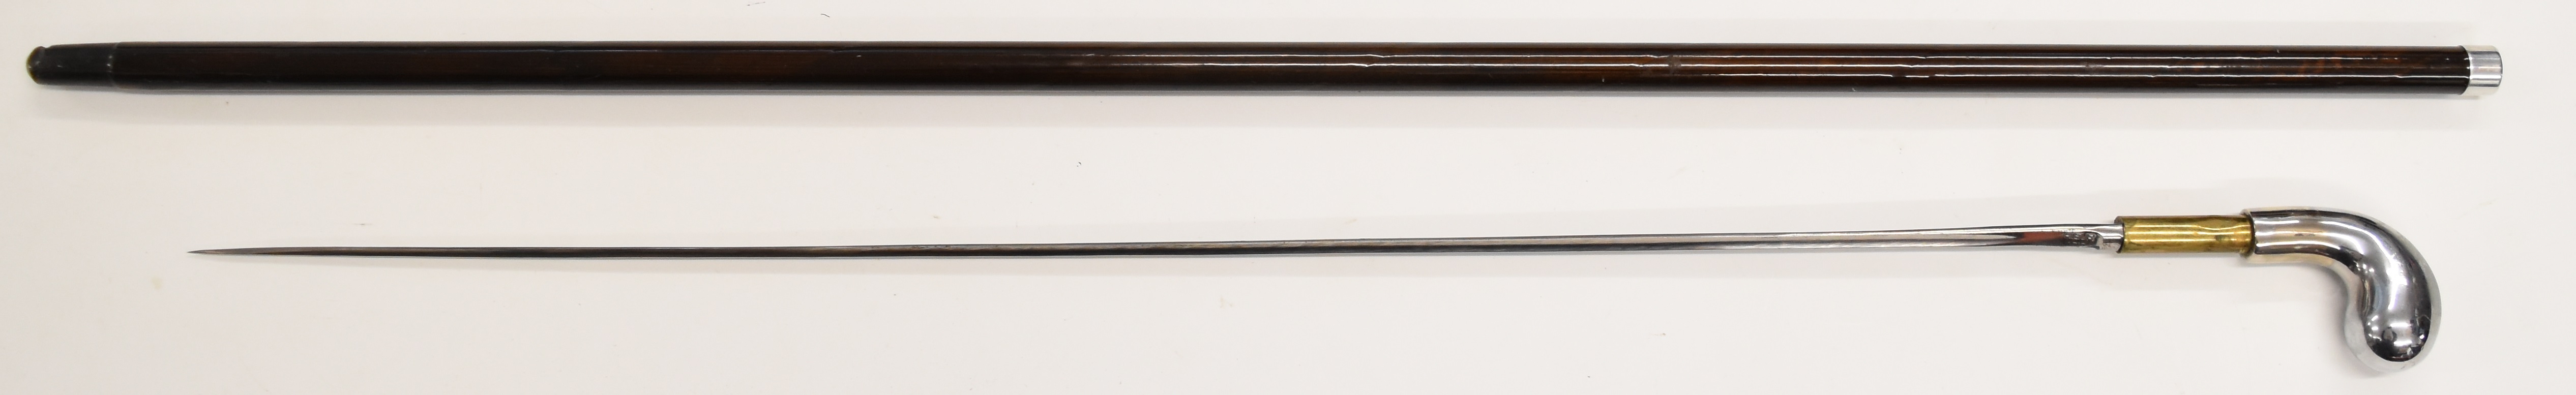 Swordstick with Prieur to the 65cm blade, overall length 84cm. PLEASE NOTE ALL BLADED ITEMS ARE